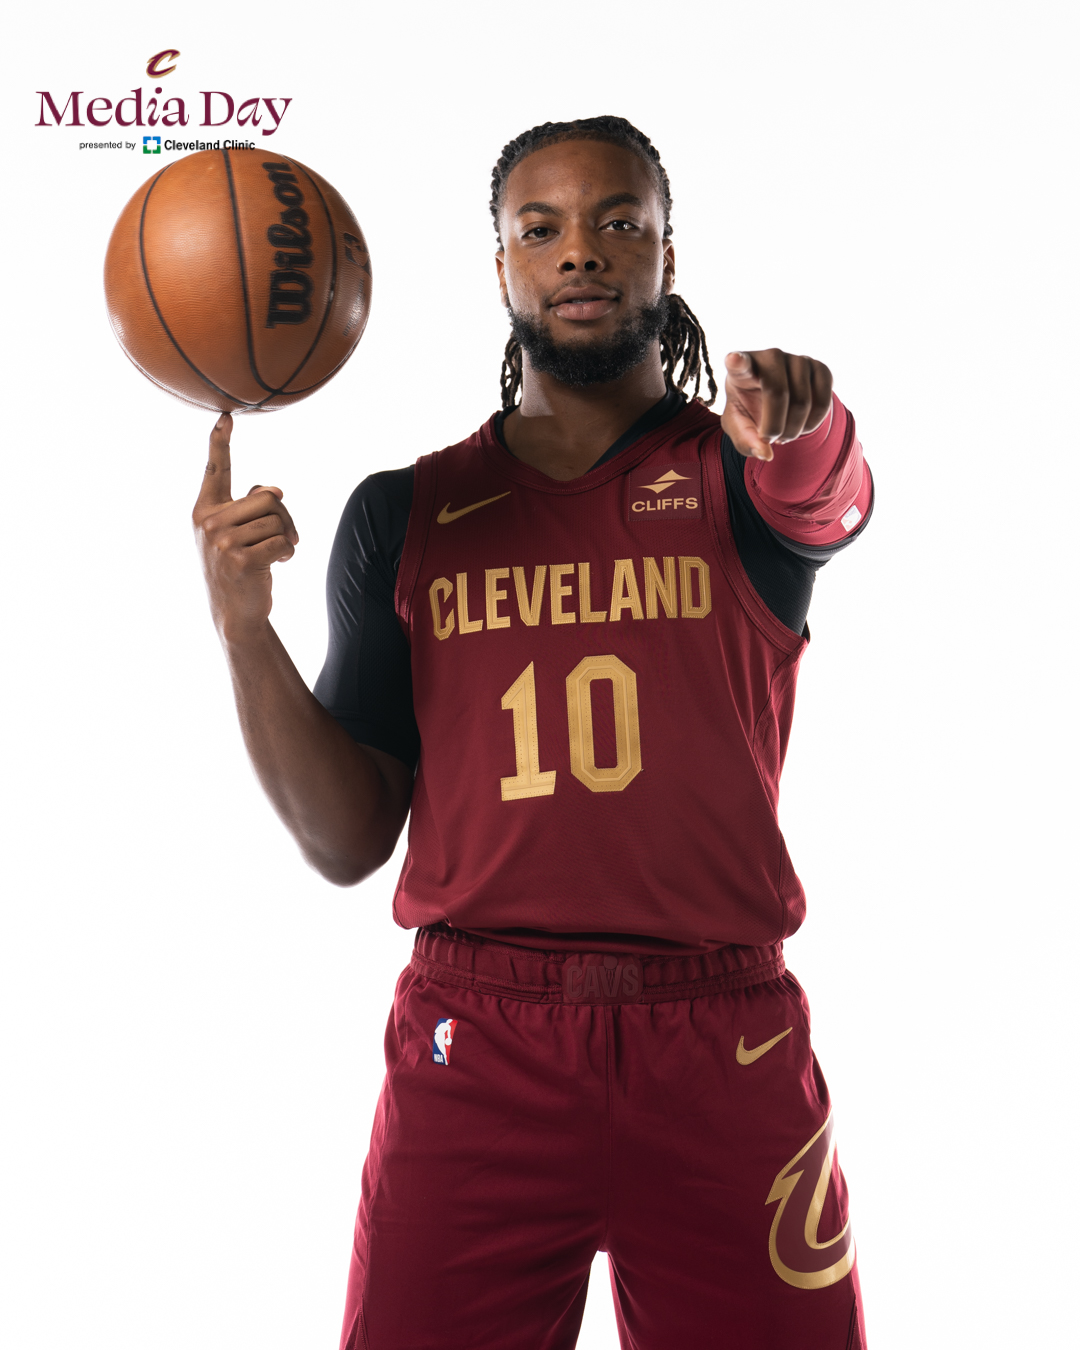 Cleveland Cavaliers Team Shop - Order your Valentine a Custom